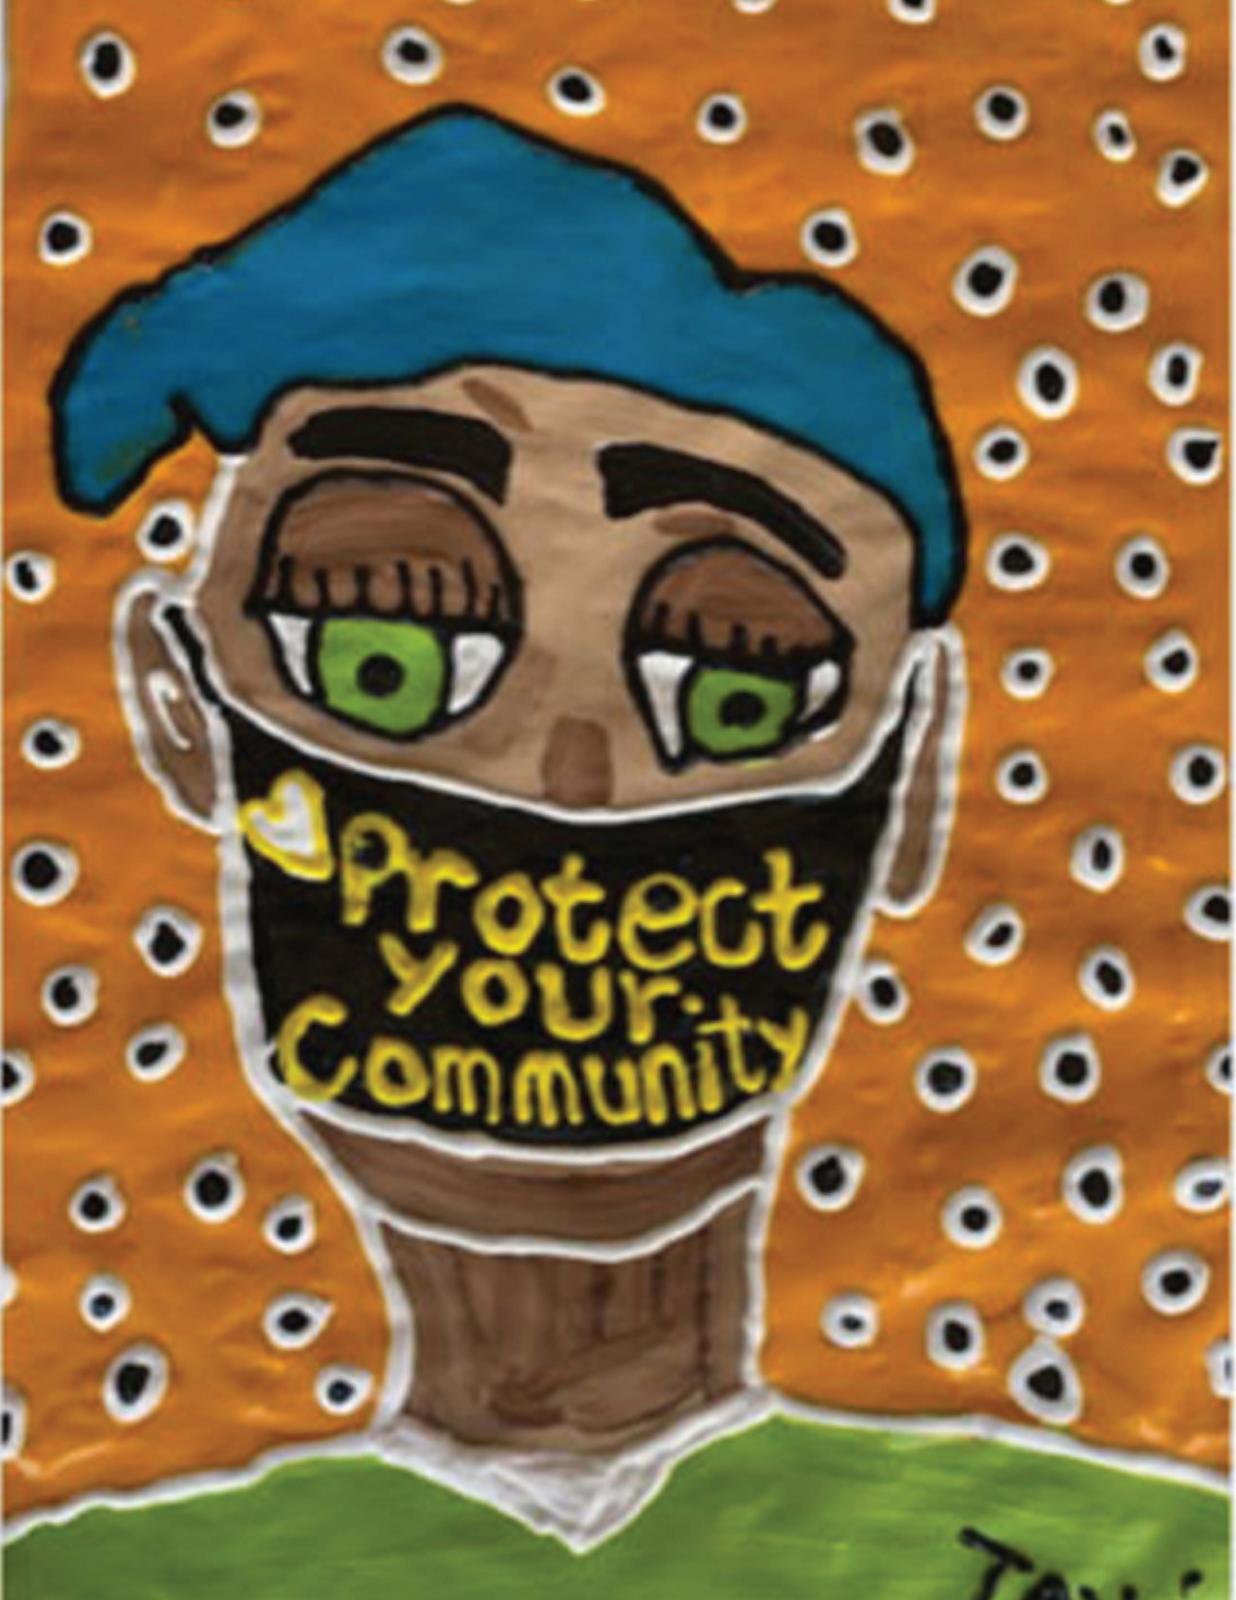 Protect your community